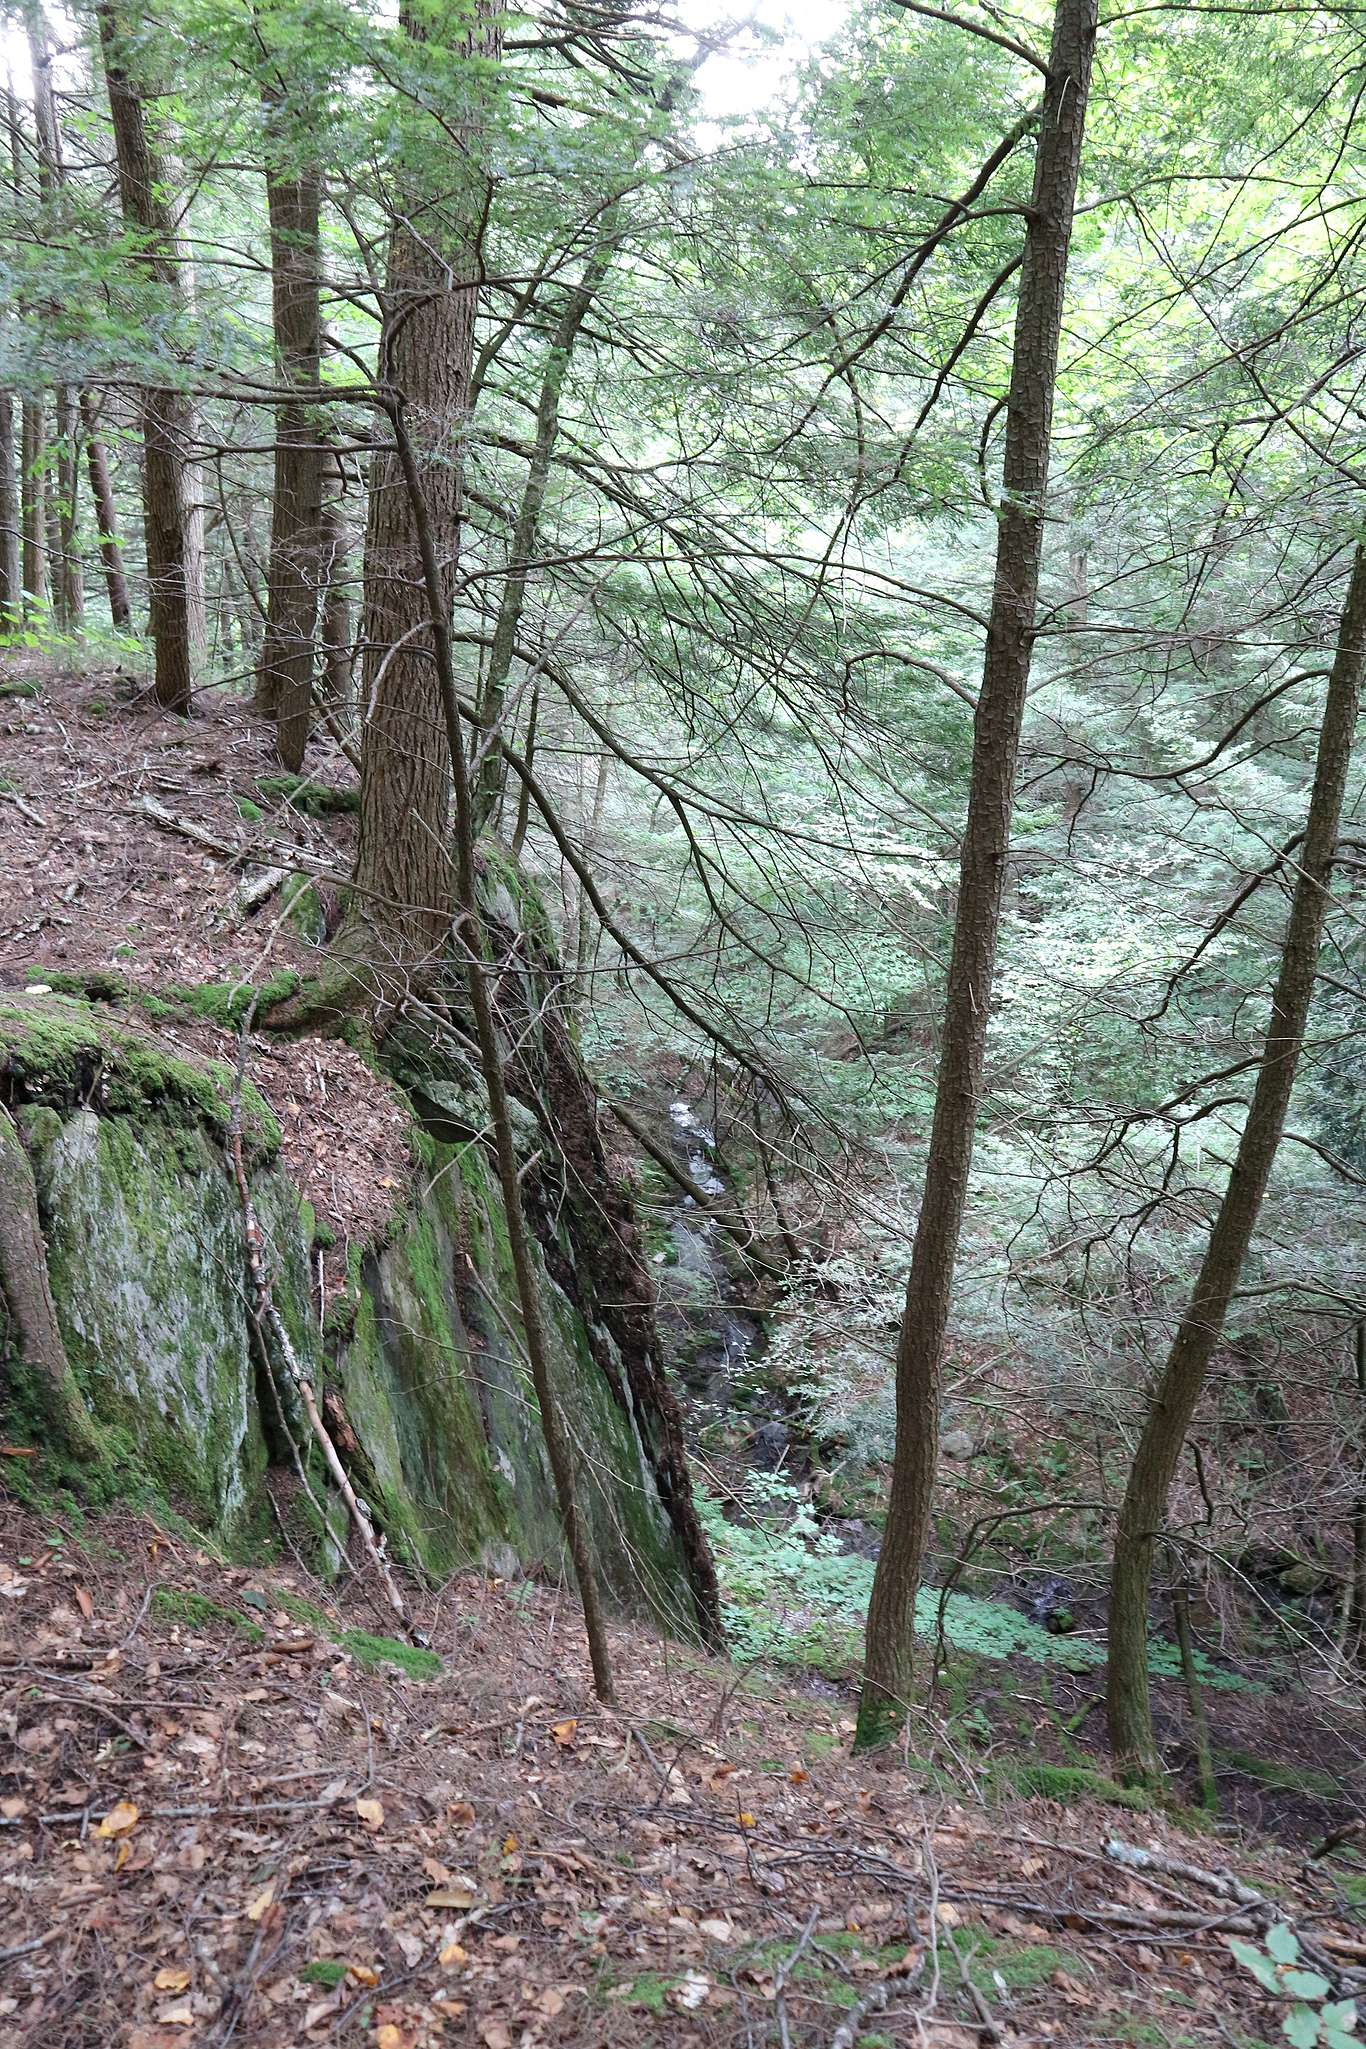 A steep, wooded cliffside